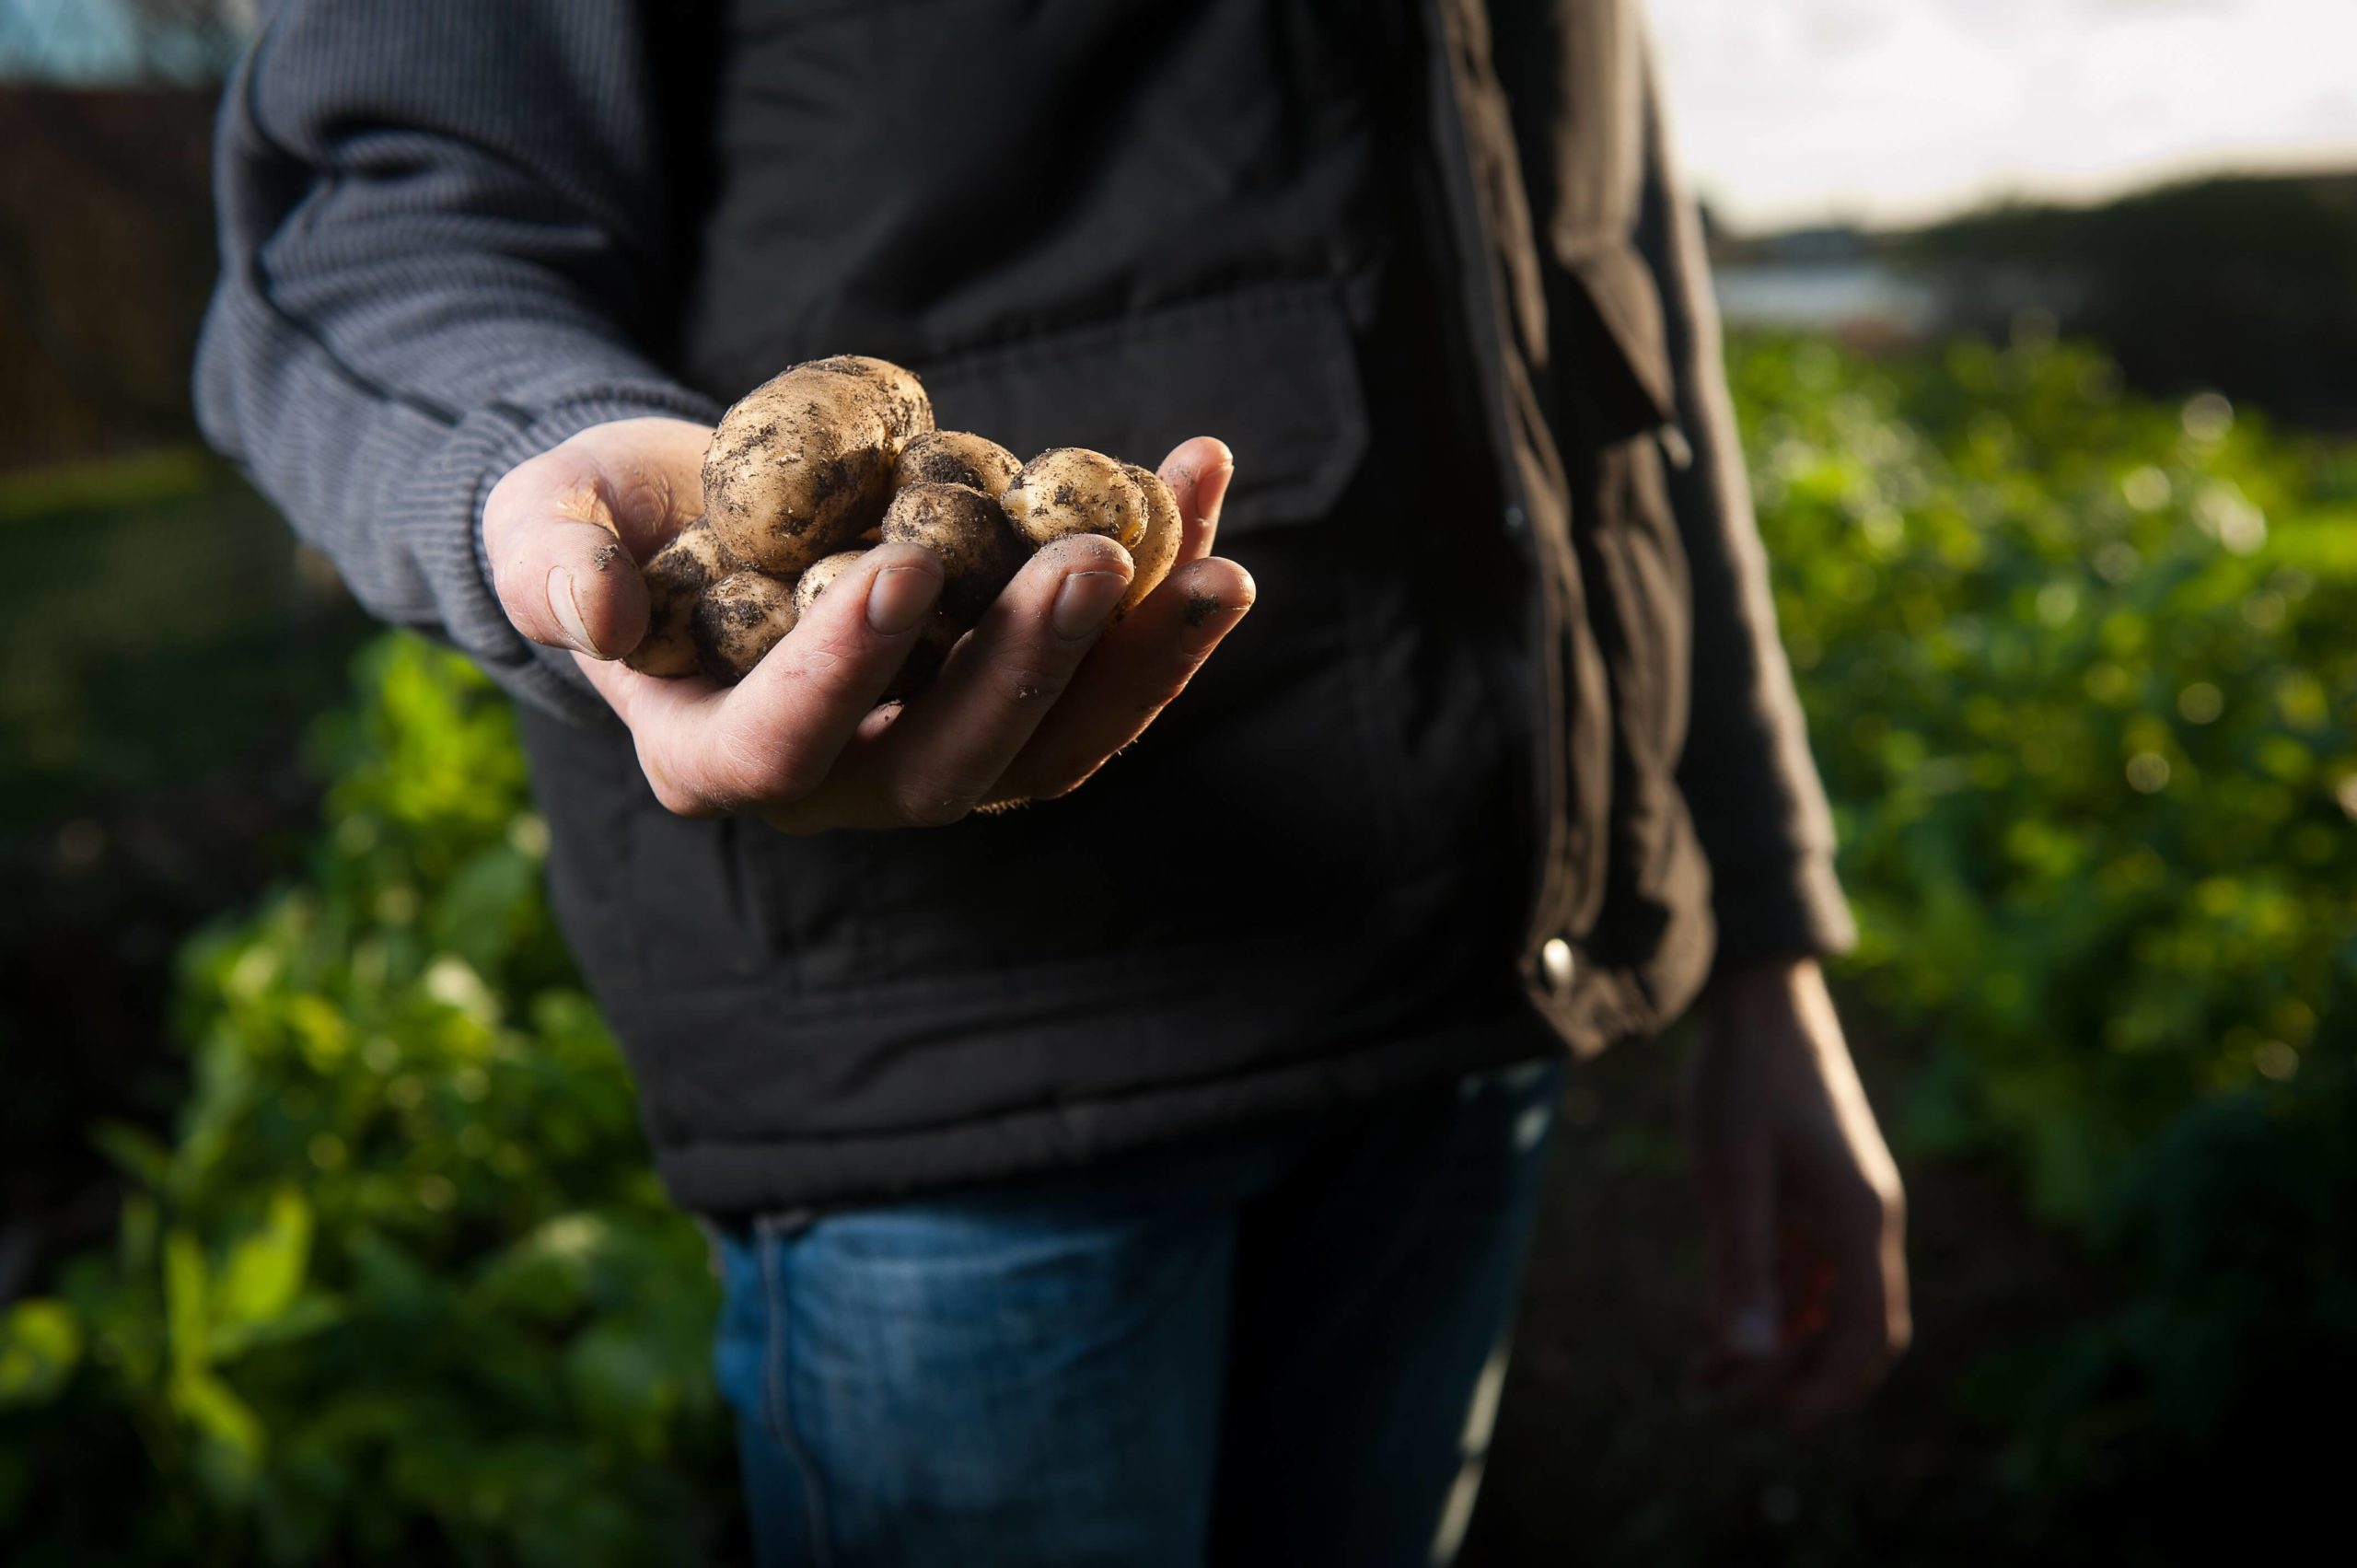 Man holding potatoes in hand